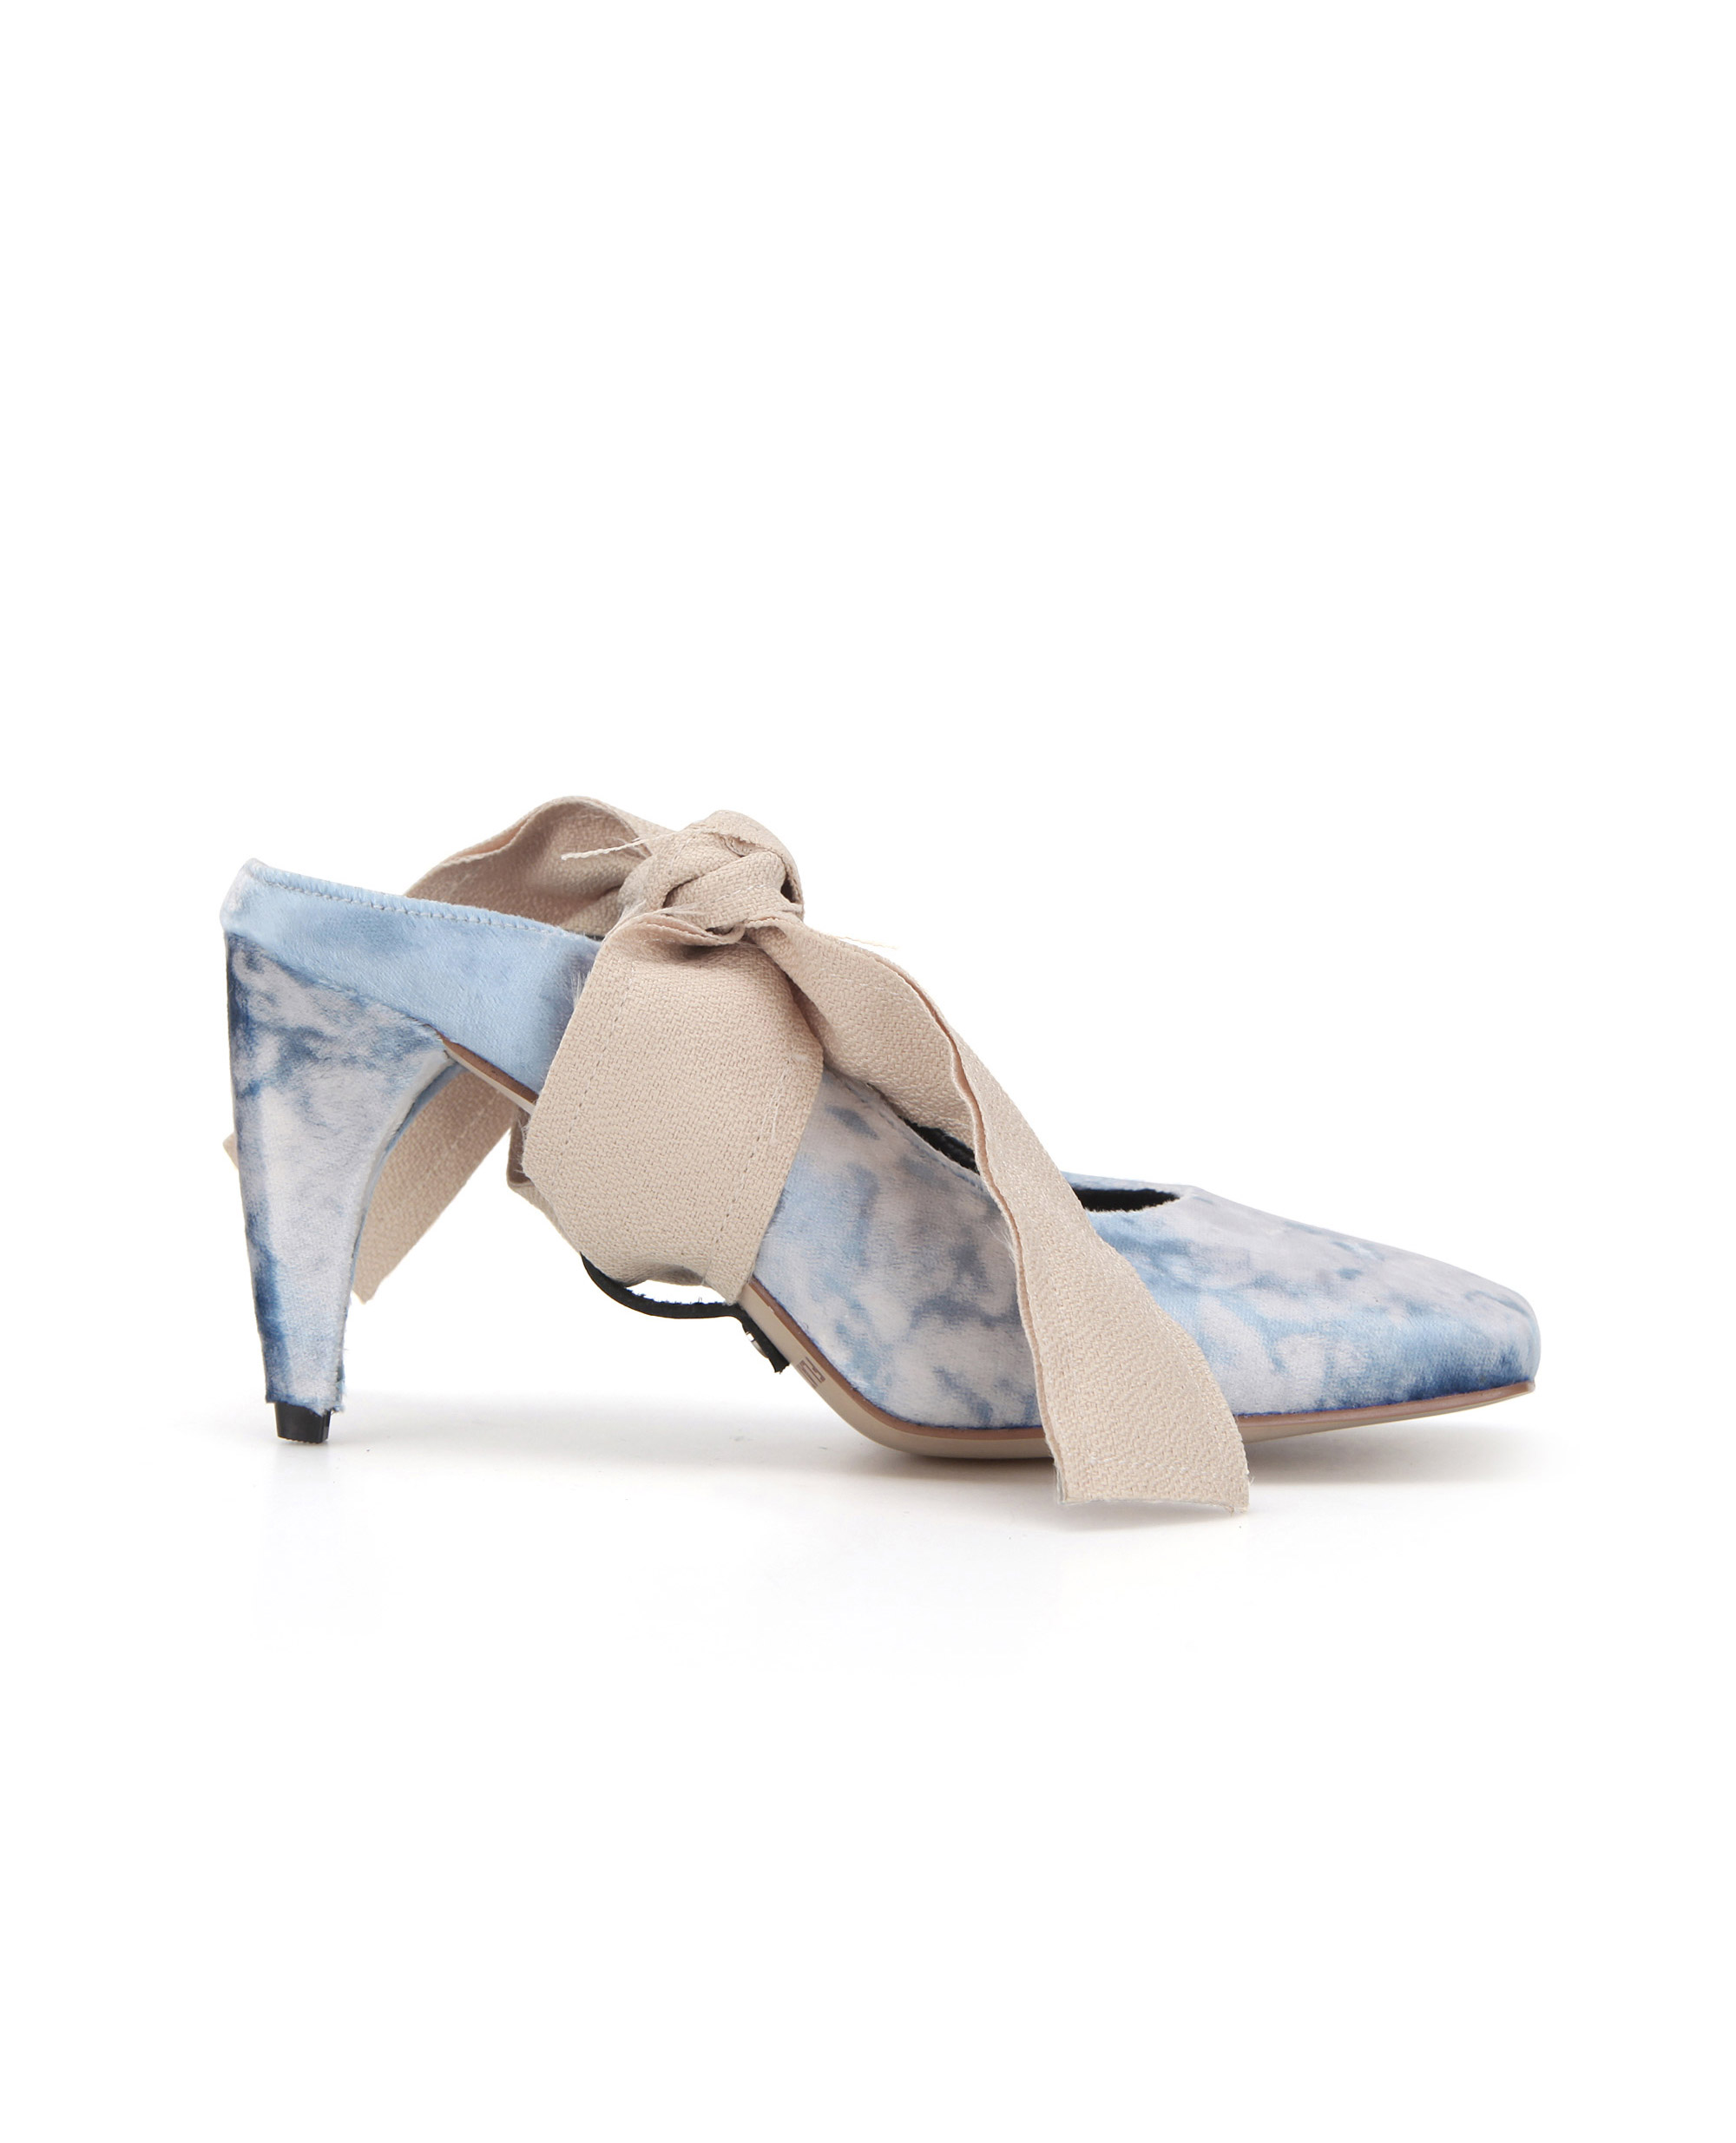 Squared toe mule with removable front ties | Blue ink